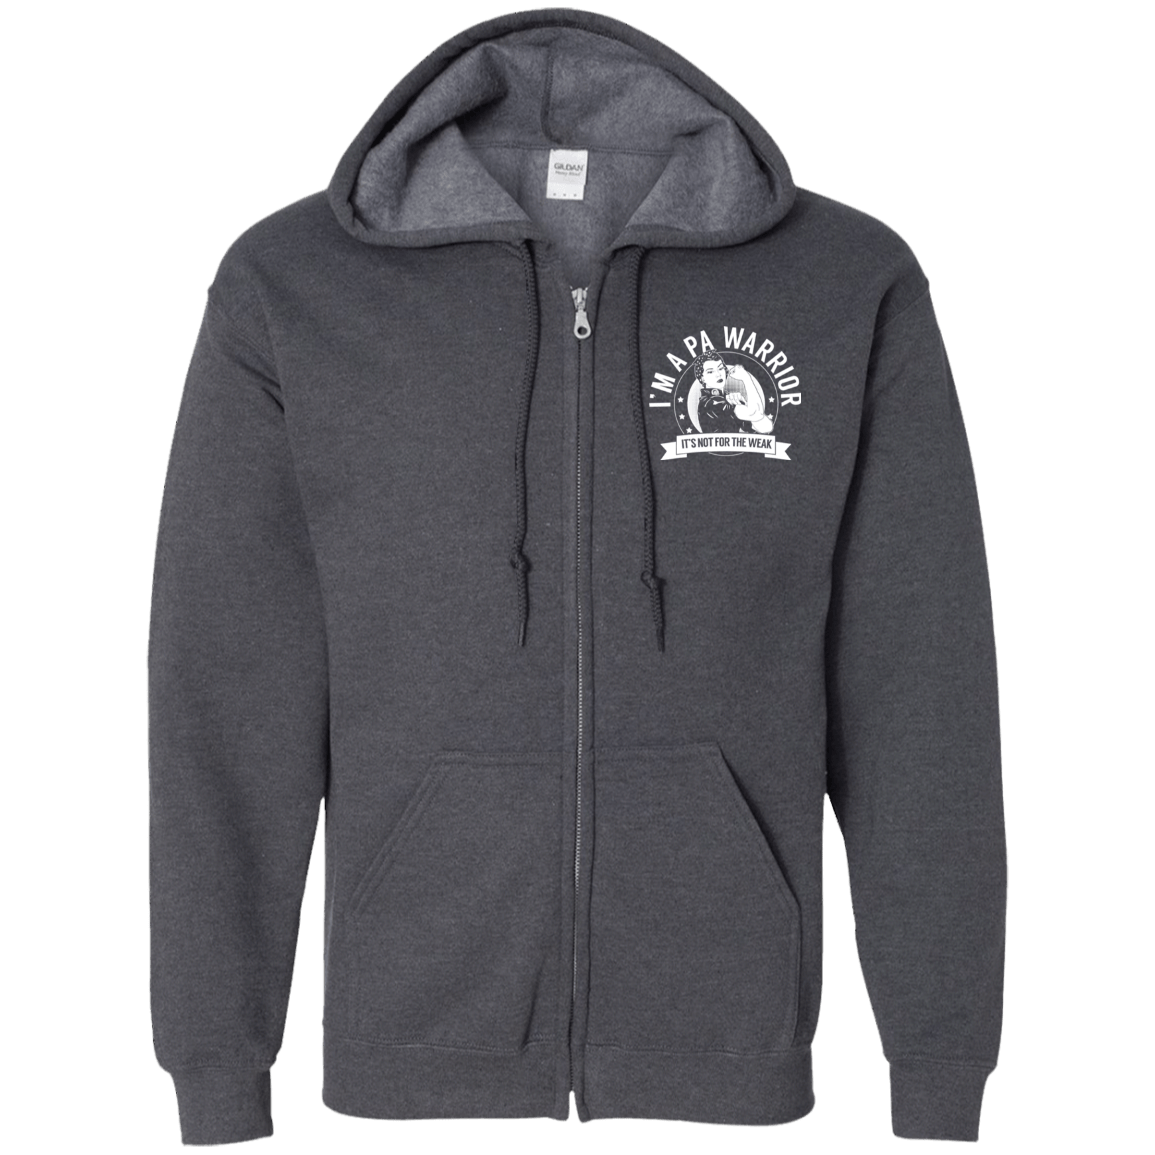 Pernicious Anaemia - PA Warrior NFTW Zip Up Hooded Sweatshirt - The Unchargeables